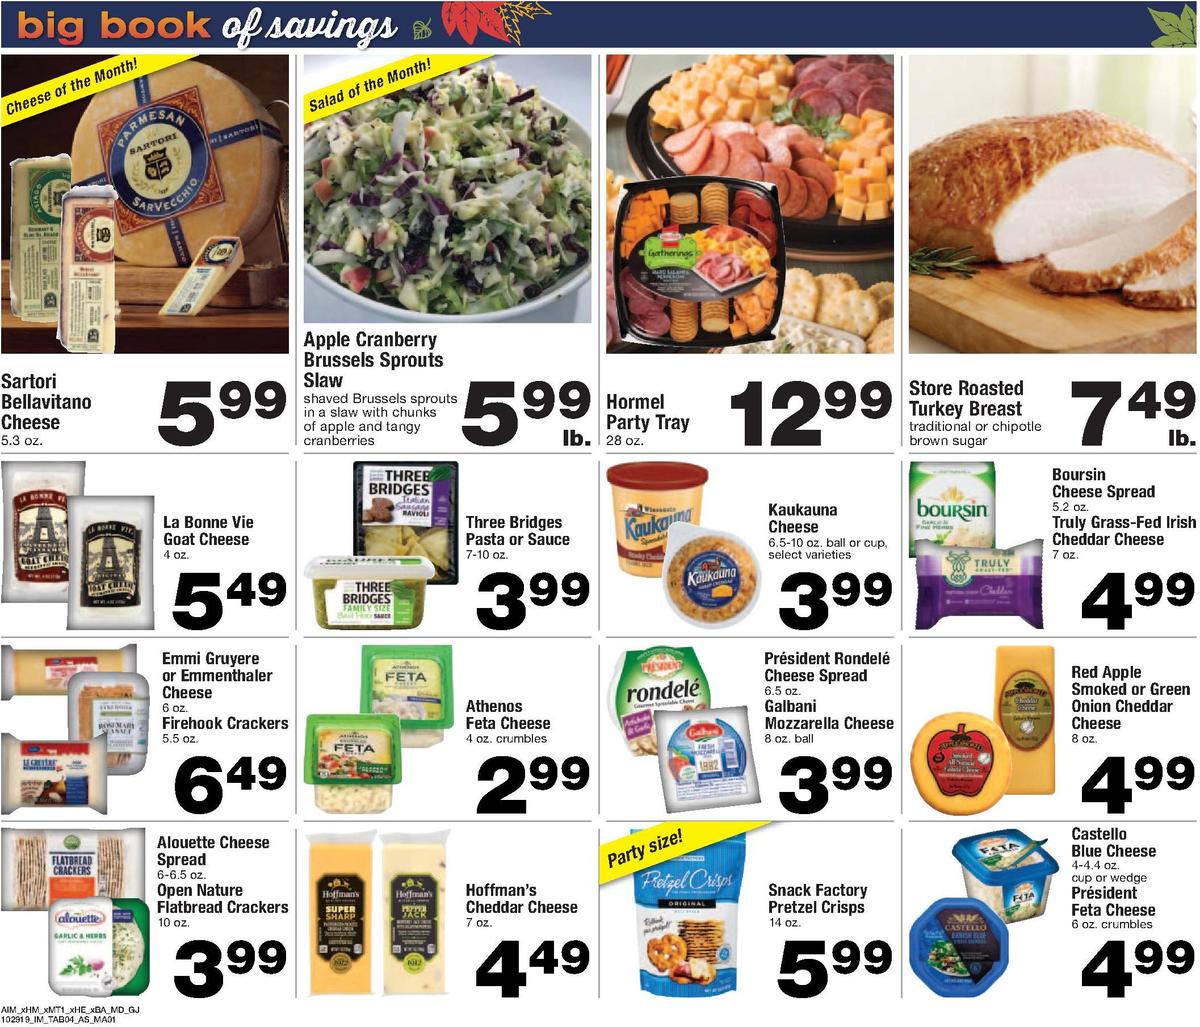 Albertsons Magazine Weekly Ad from October 29